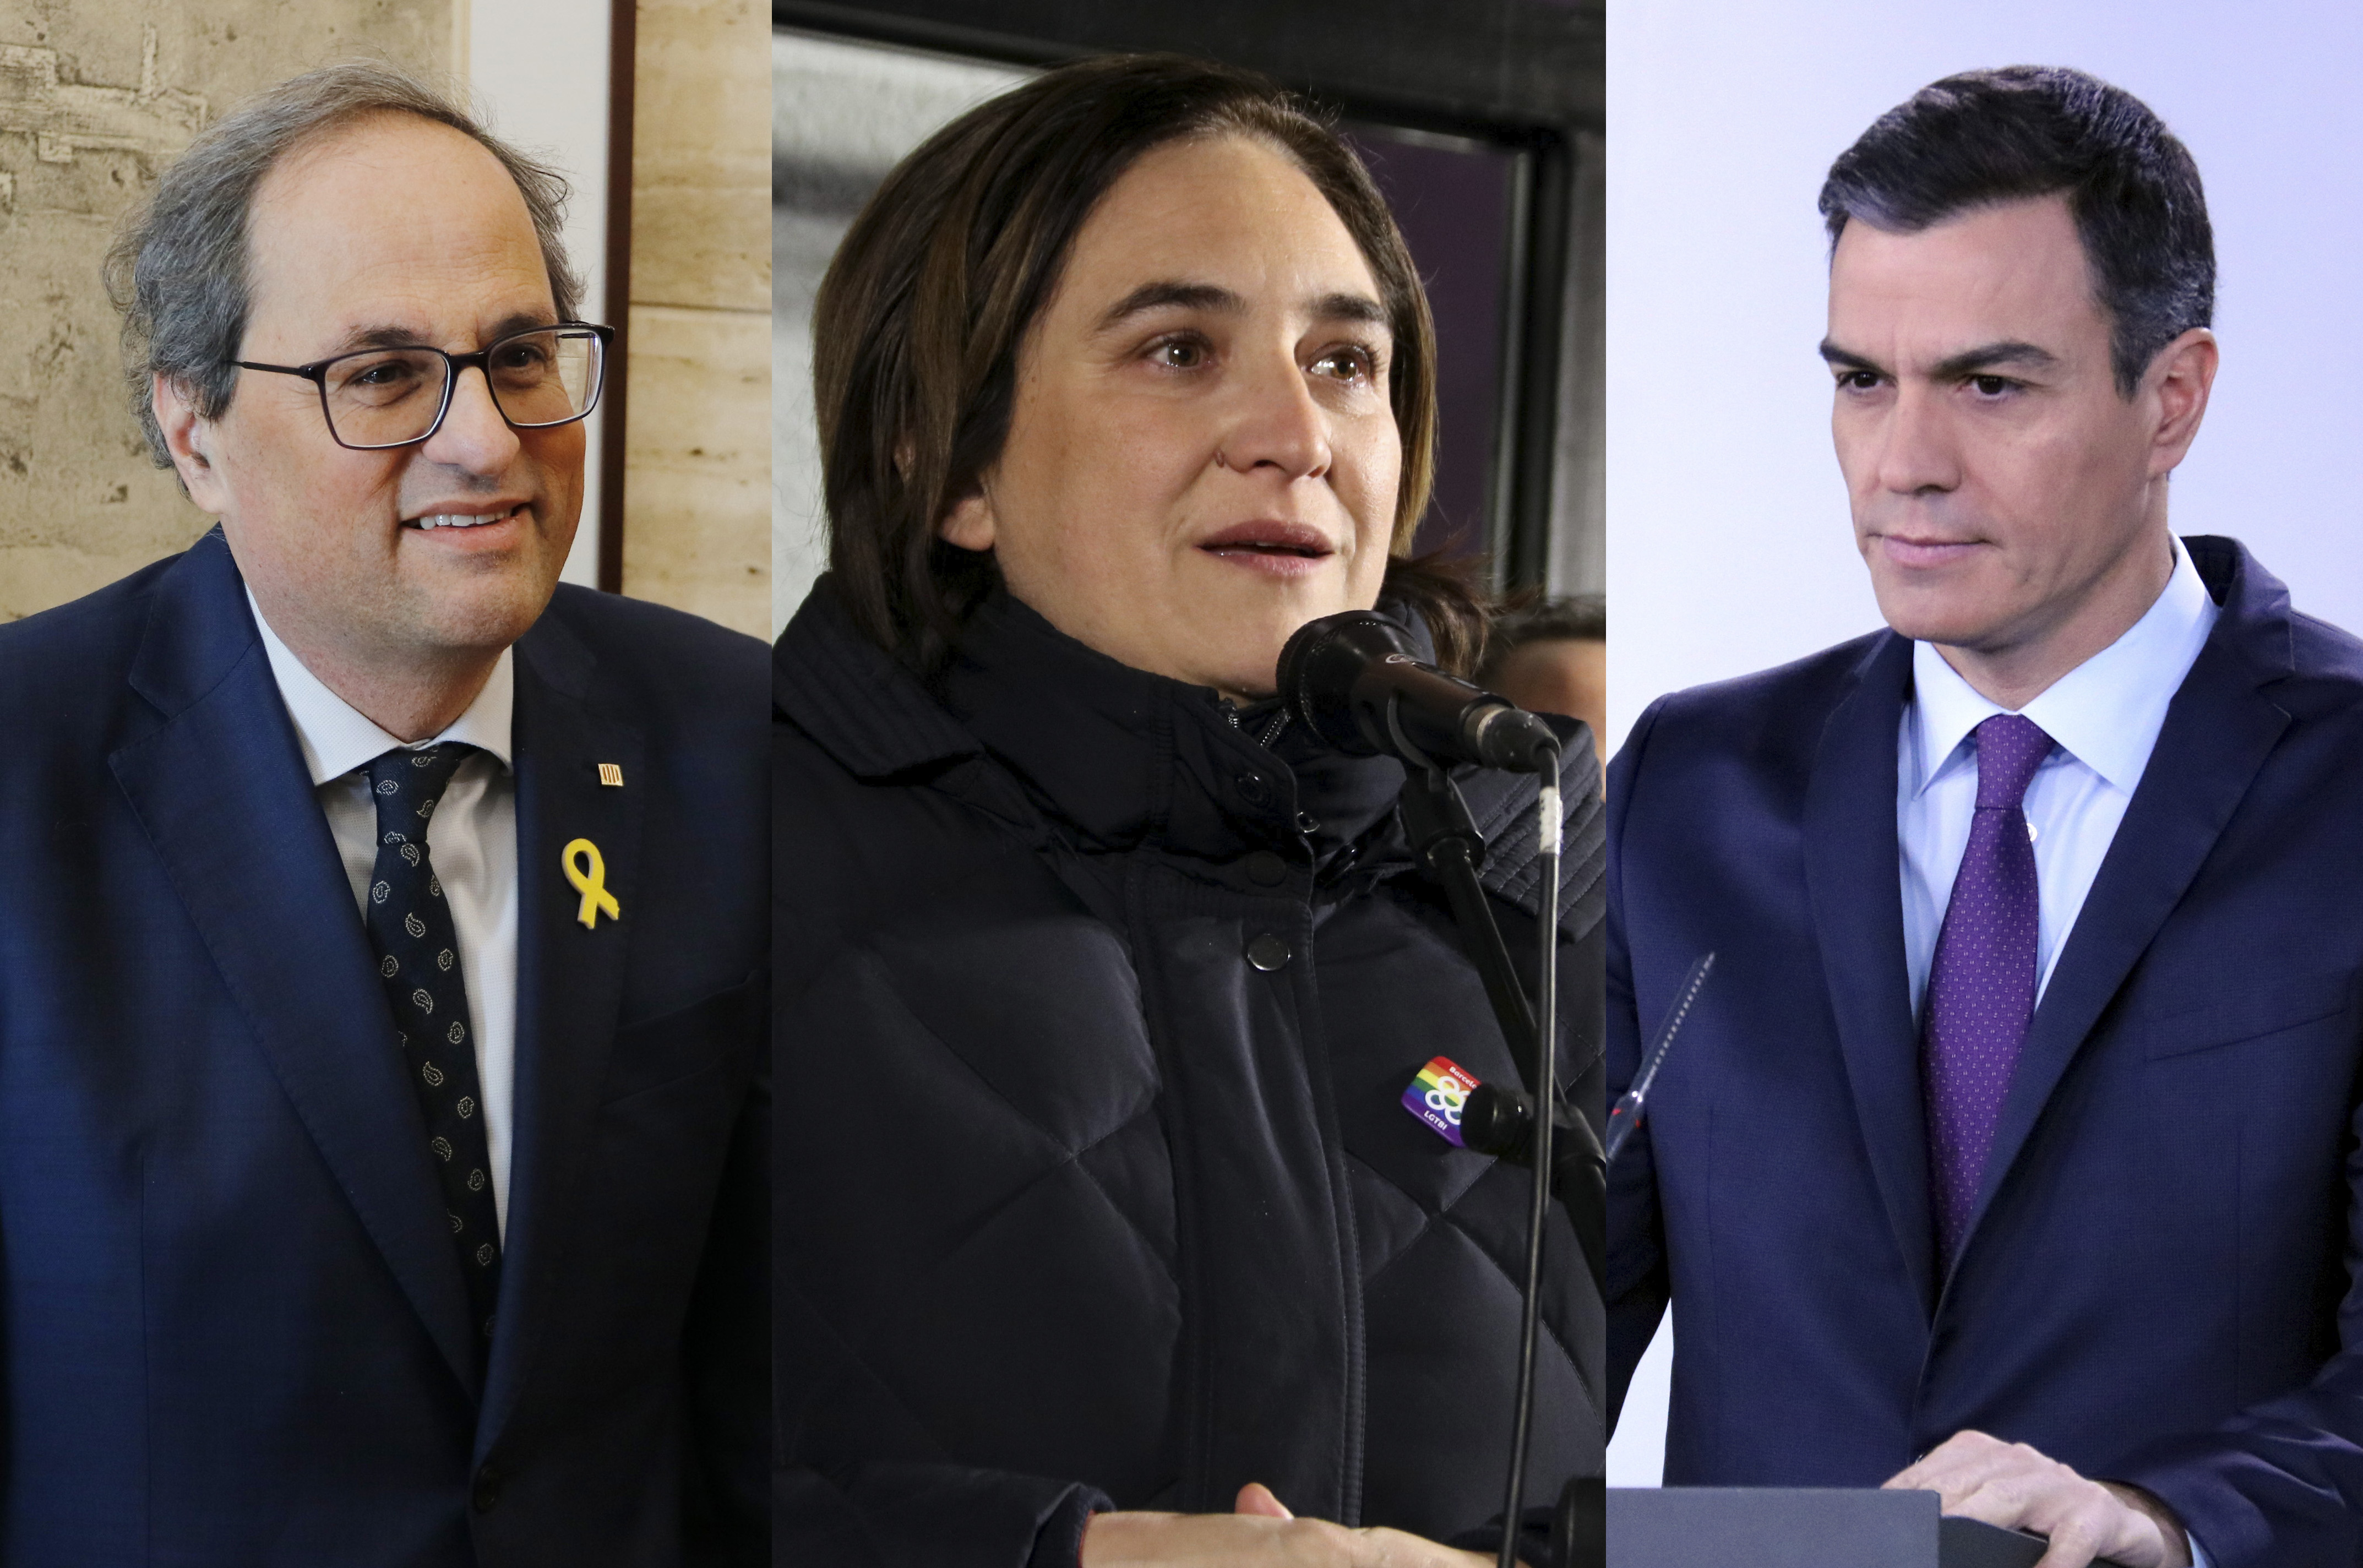 From left to right: Catalan president Quim Torra, Barcelona mayor Ada Colau, and Spanish president Pedro Sánchez (by ACN)